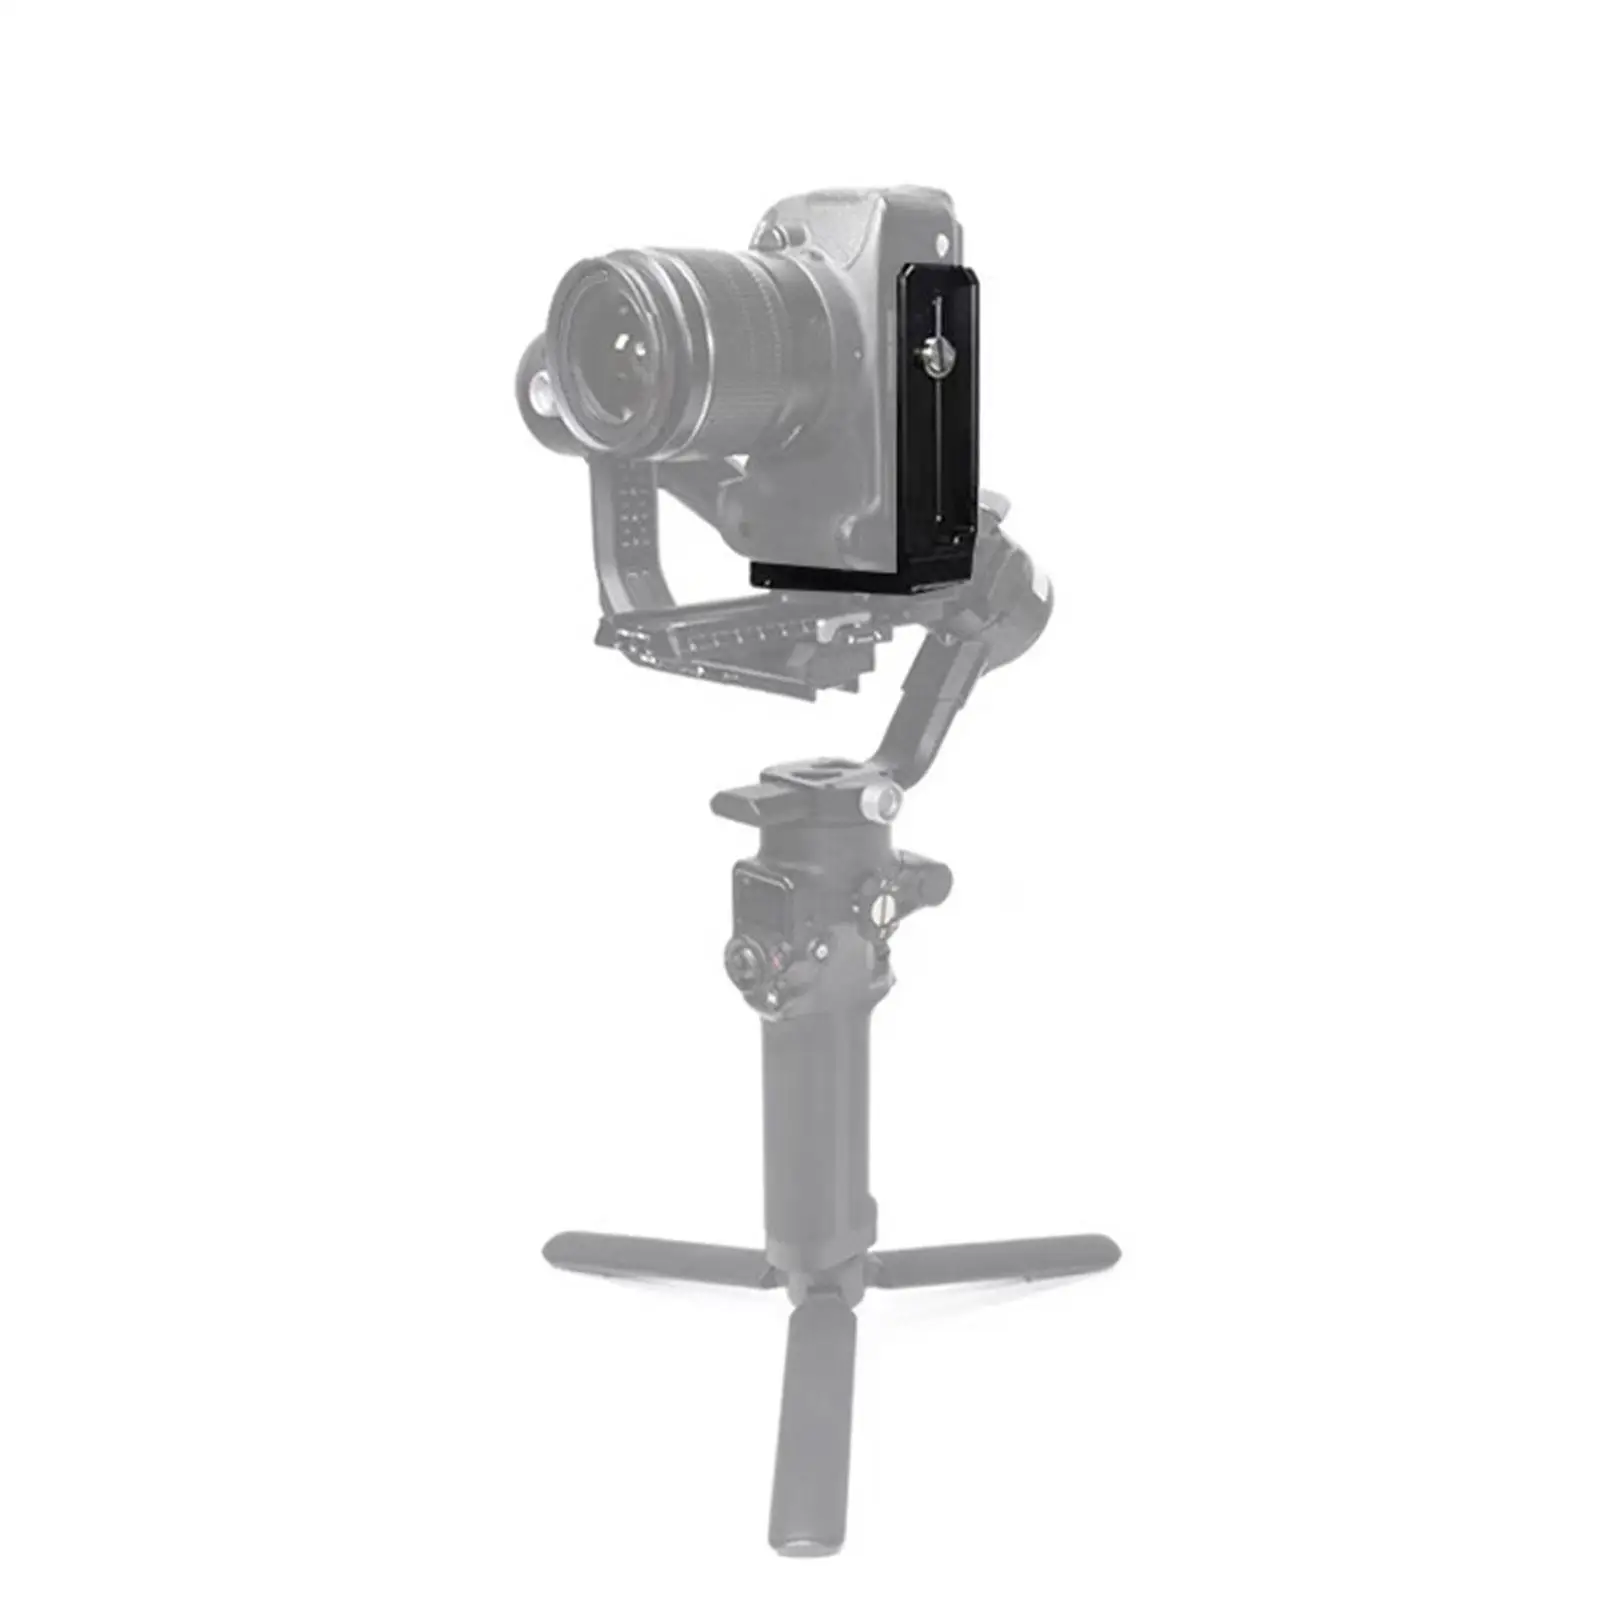 Professional Camera L Bracket with 1/4`` Threaded Holes Aluminum Alloy Heavy Duty Quick Release Plate for Rsc2 Tripod Monopod